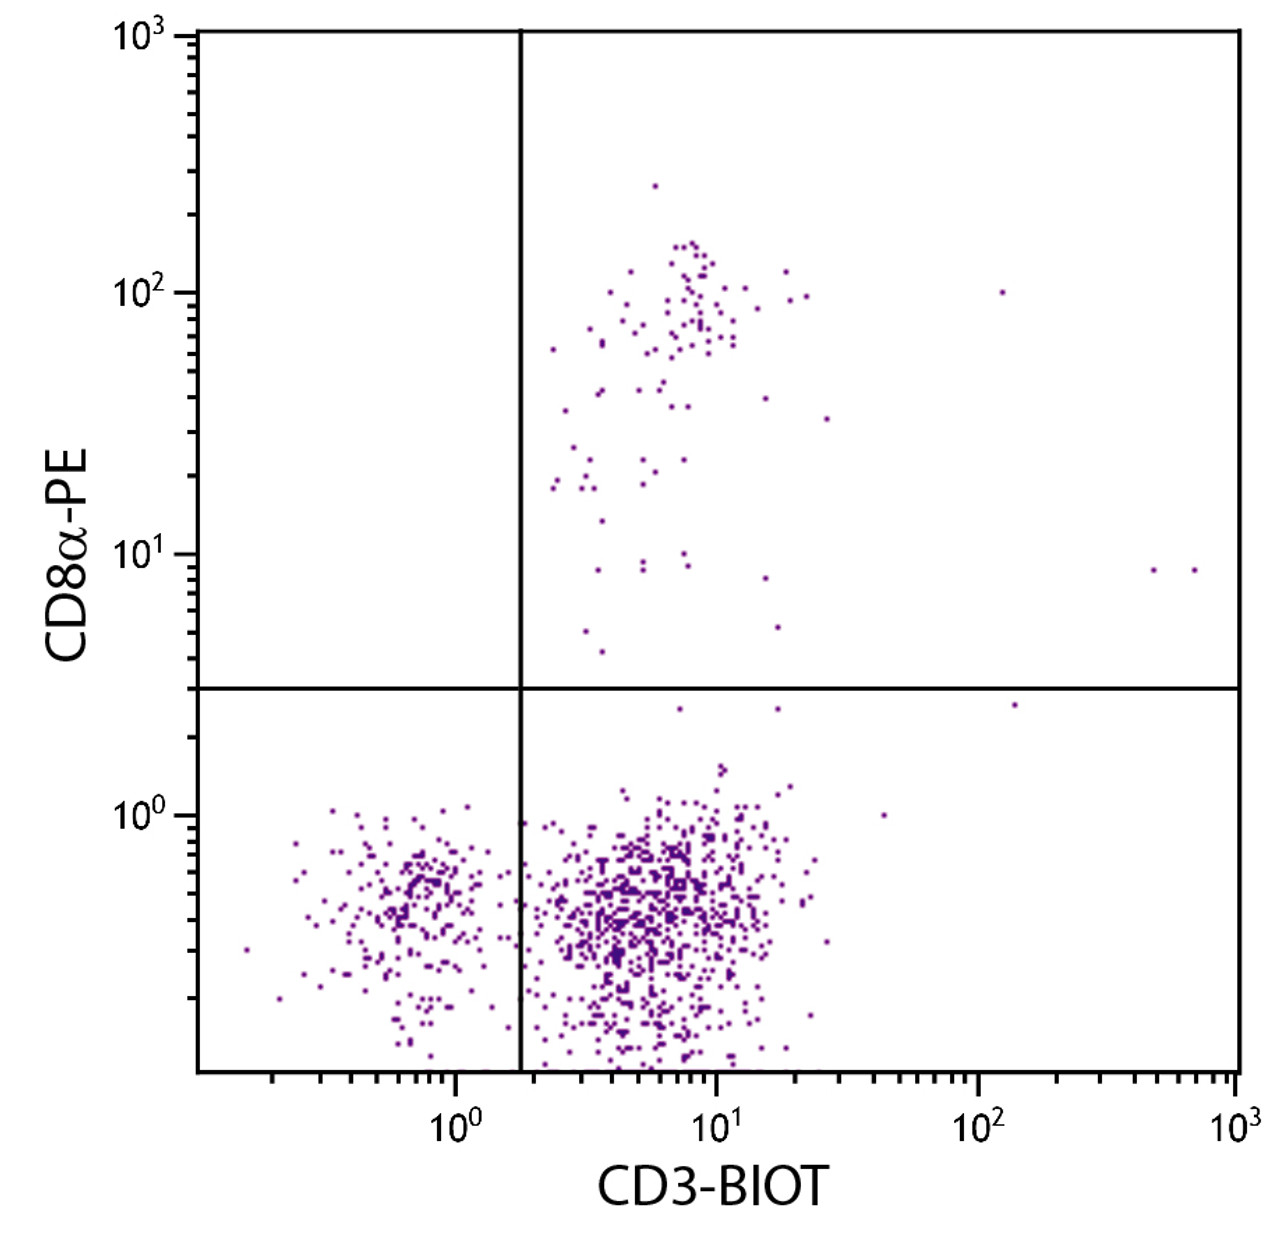 Chicken peripheral blood mononuclear cells were stained with Mouse Anti-Chicken CD3-BIOT (Cat. No. 99-203) and Mouse Anti-Chicken CD8?-PE followed by Streptavidin-FITC .